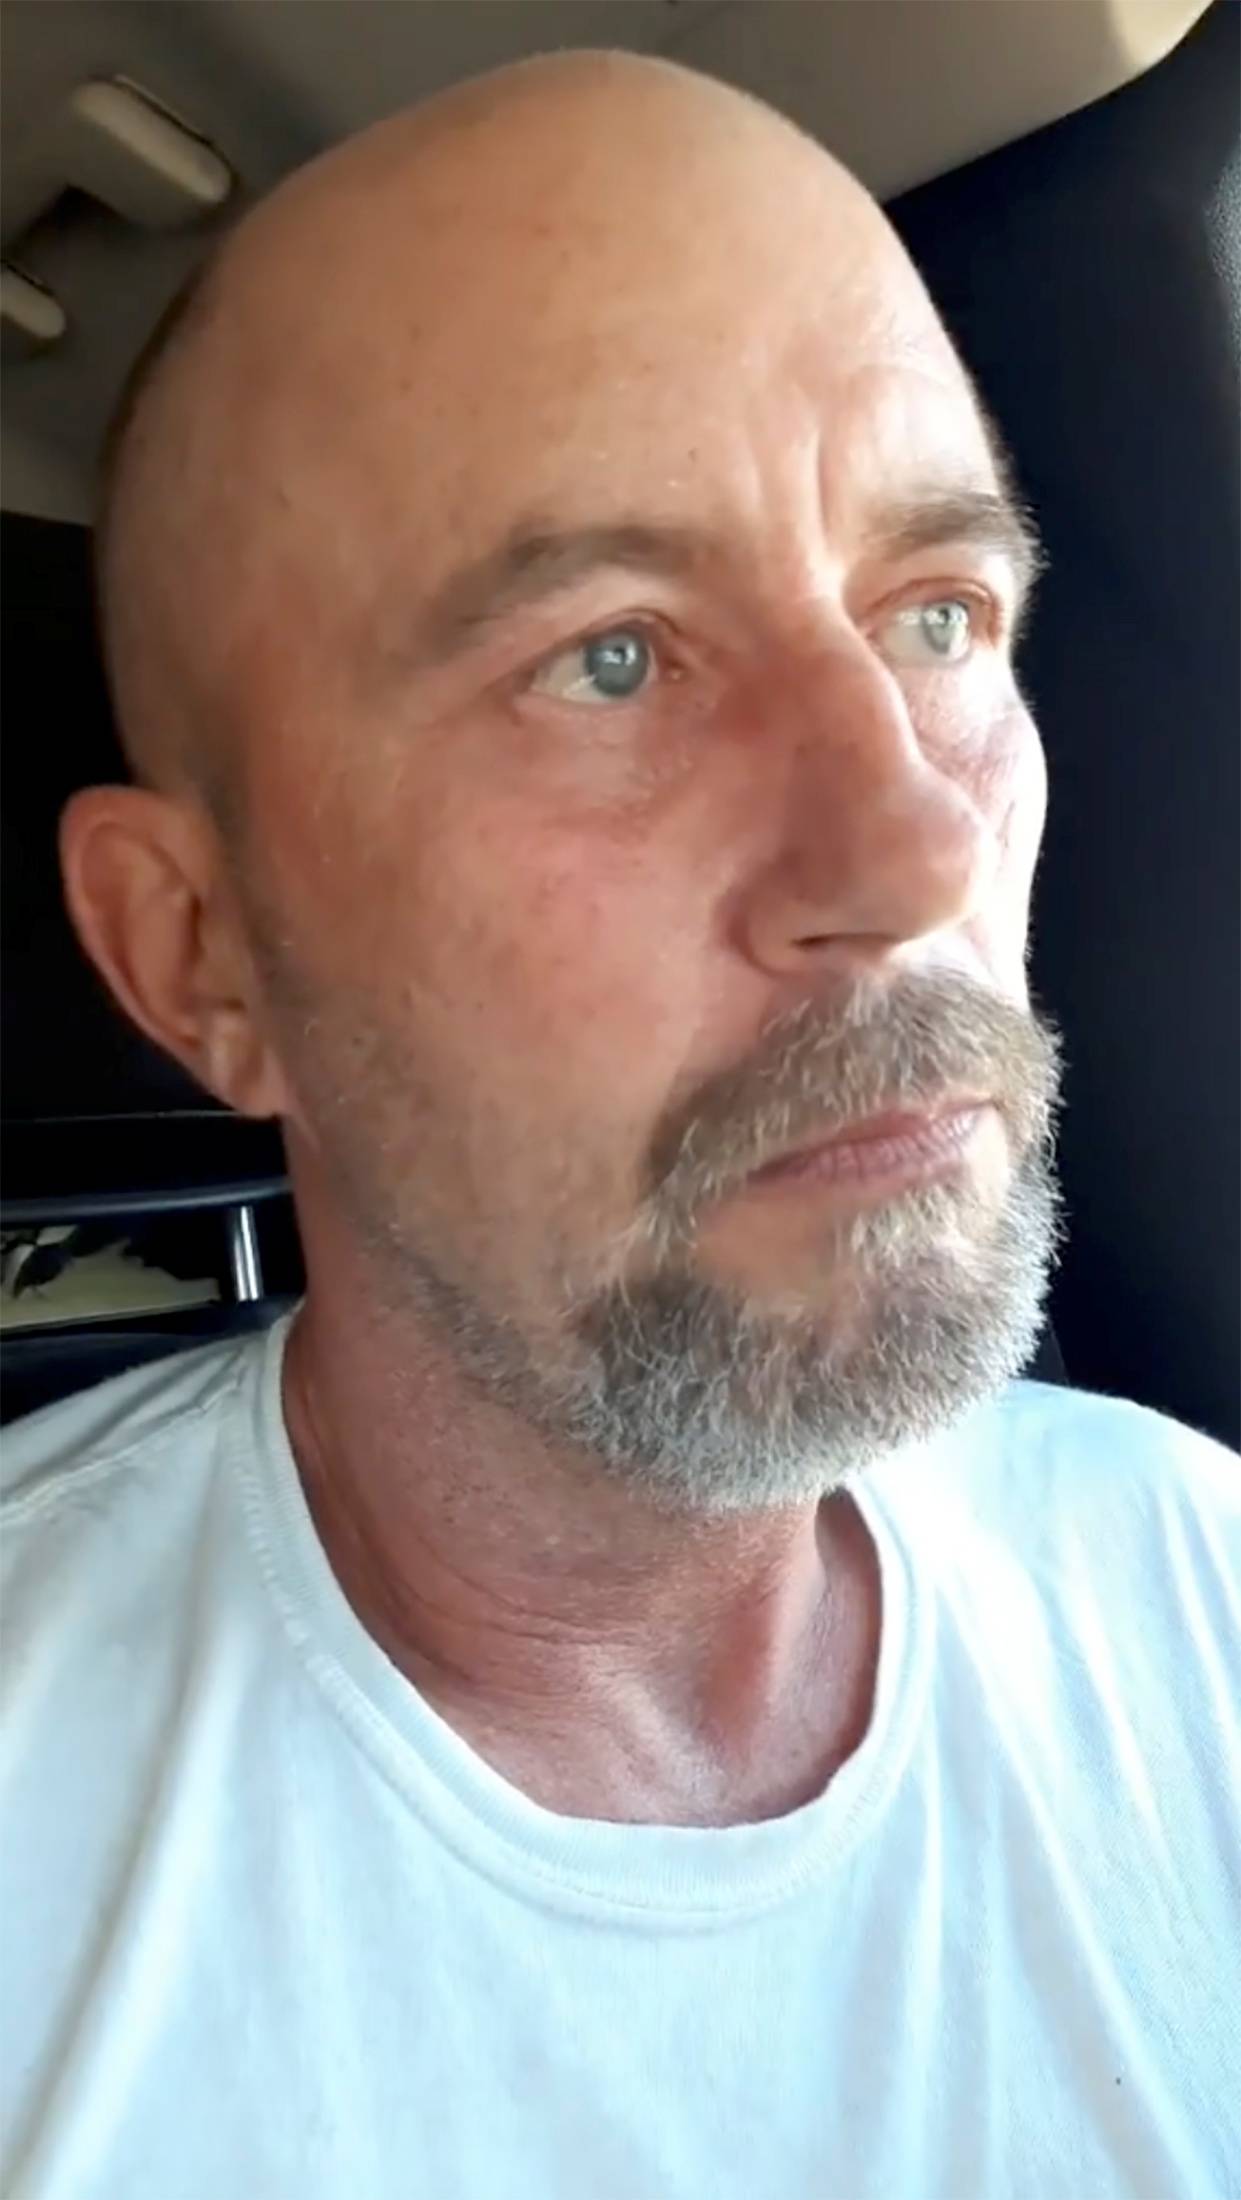 A man who claims to be sitting in his truck with explosives speaks during a Facebook livestream